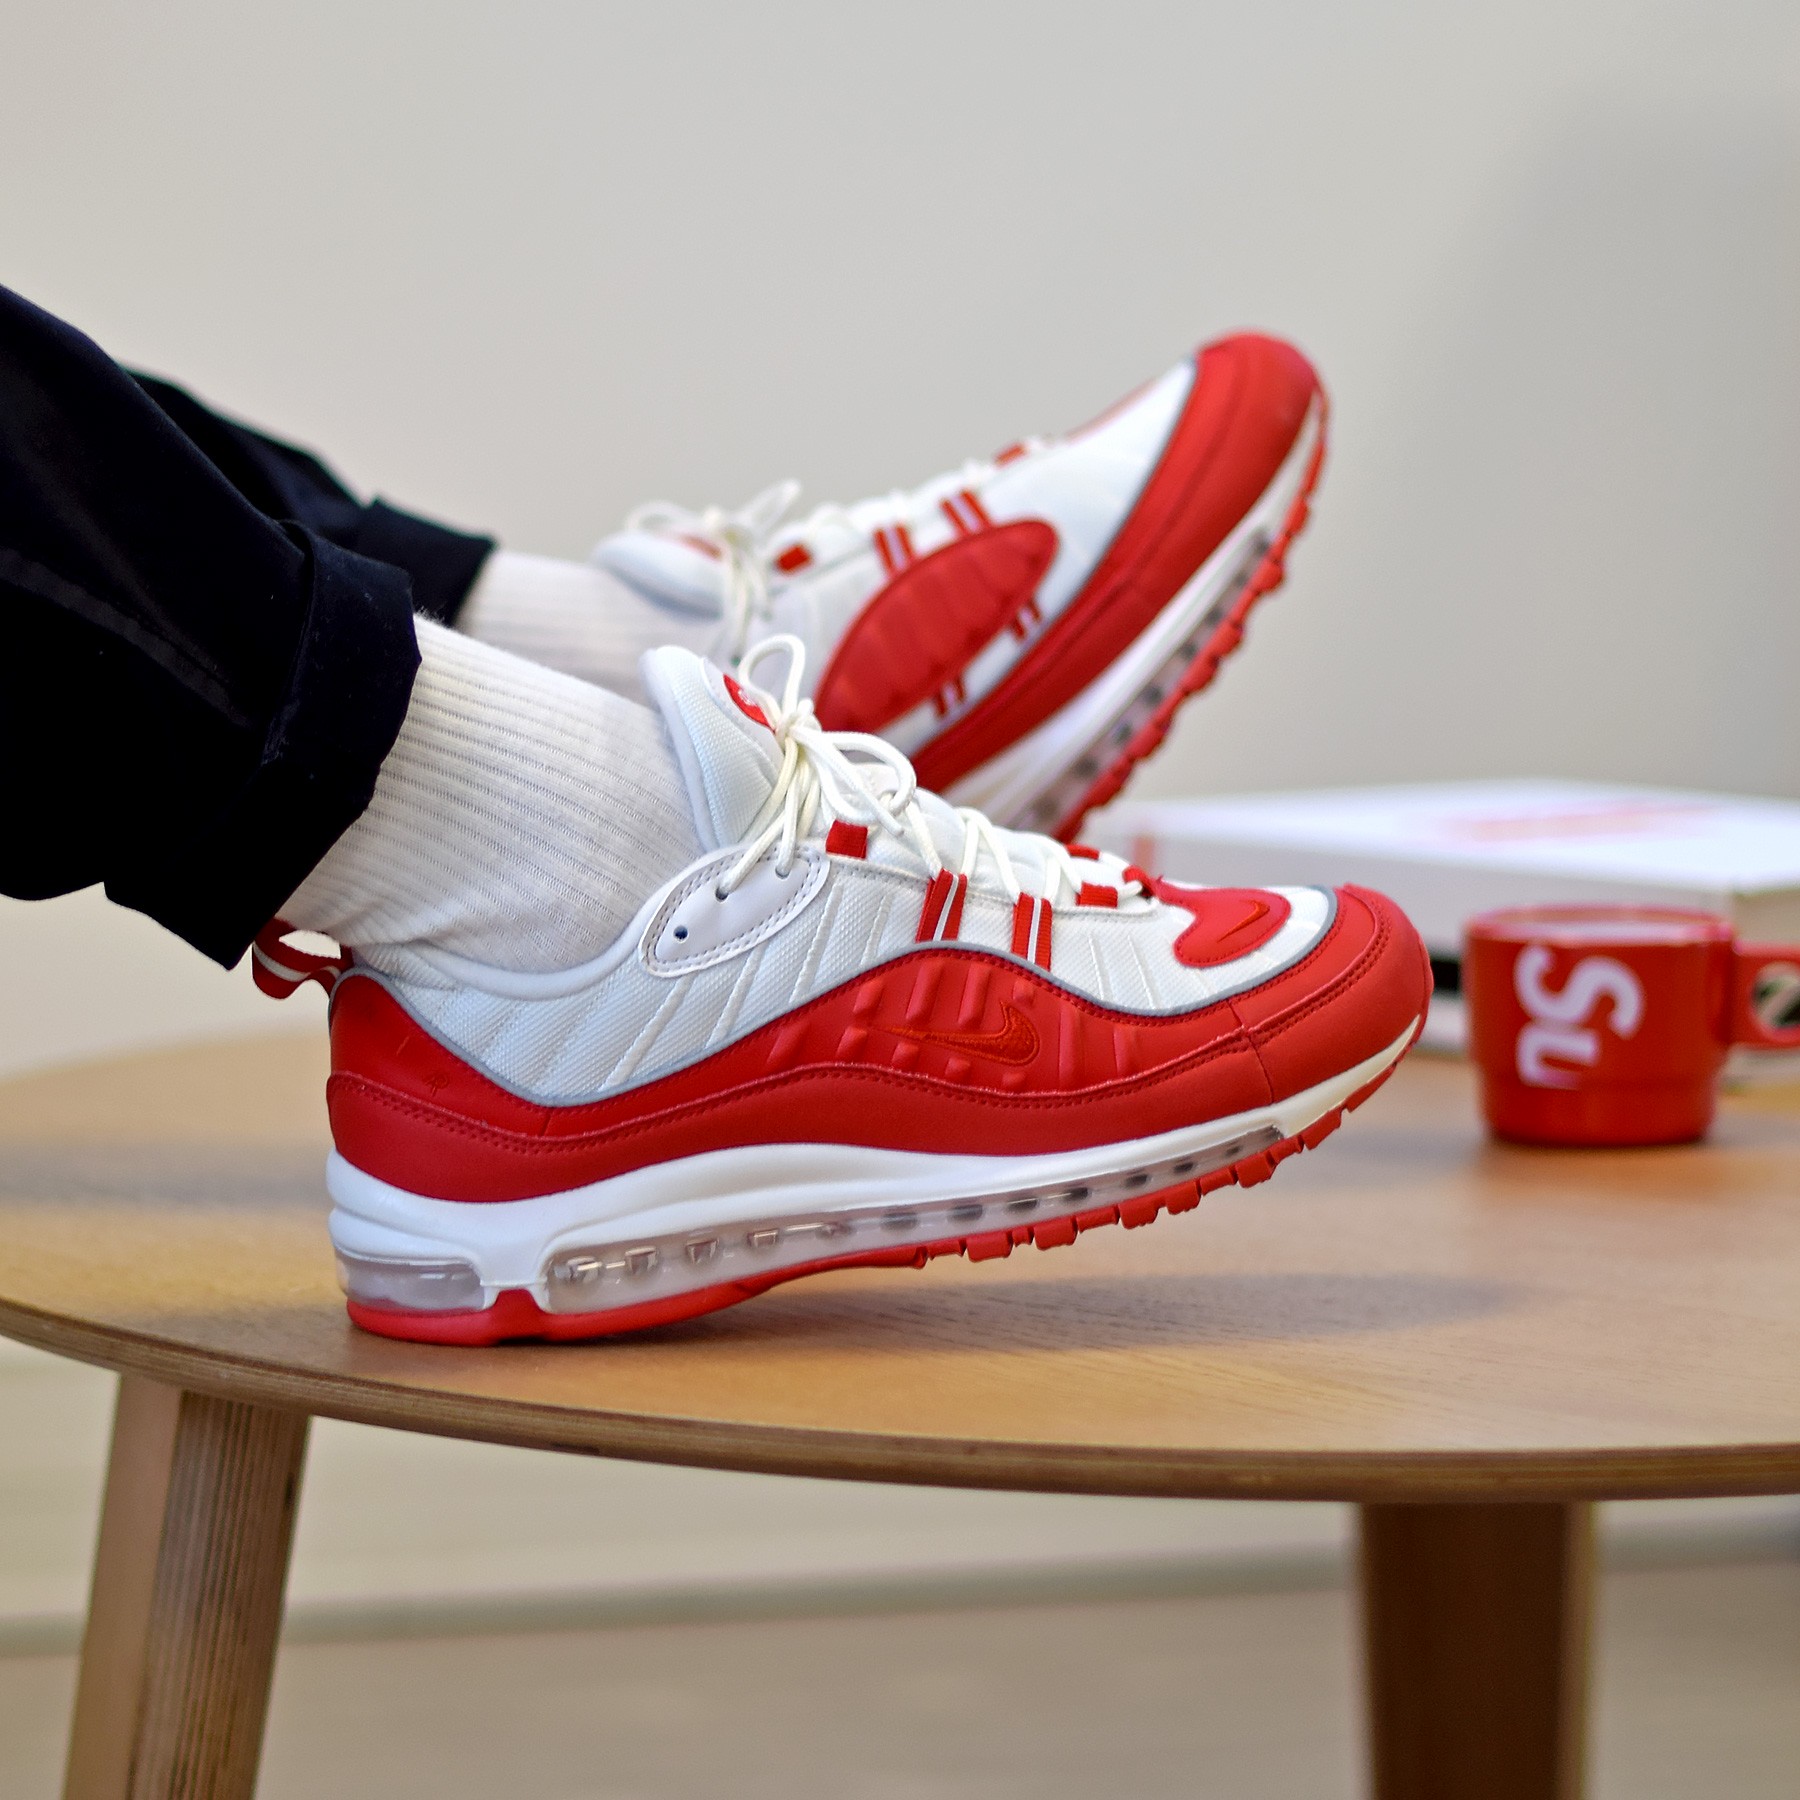 Nike Max 98 Red